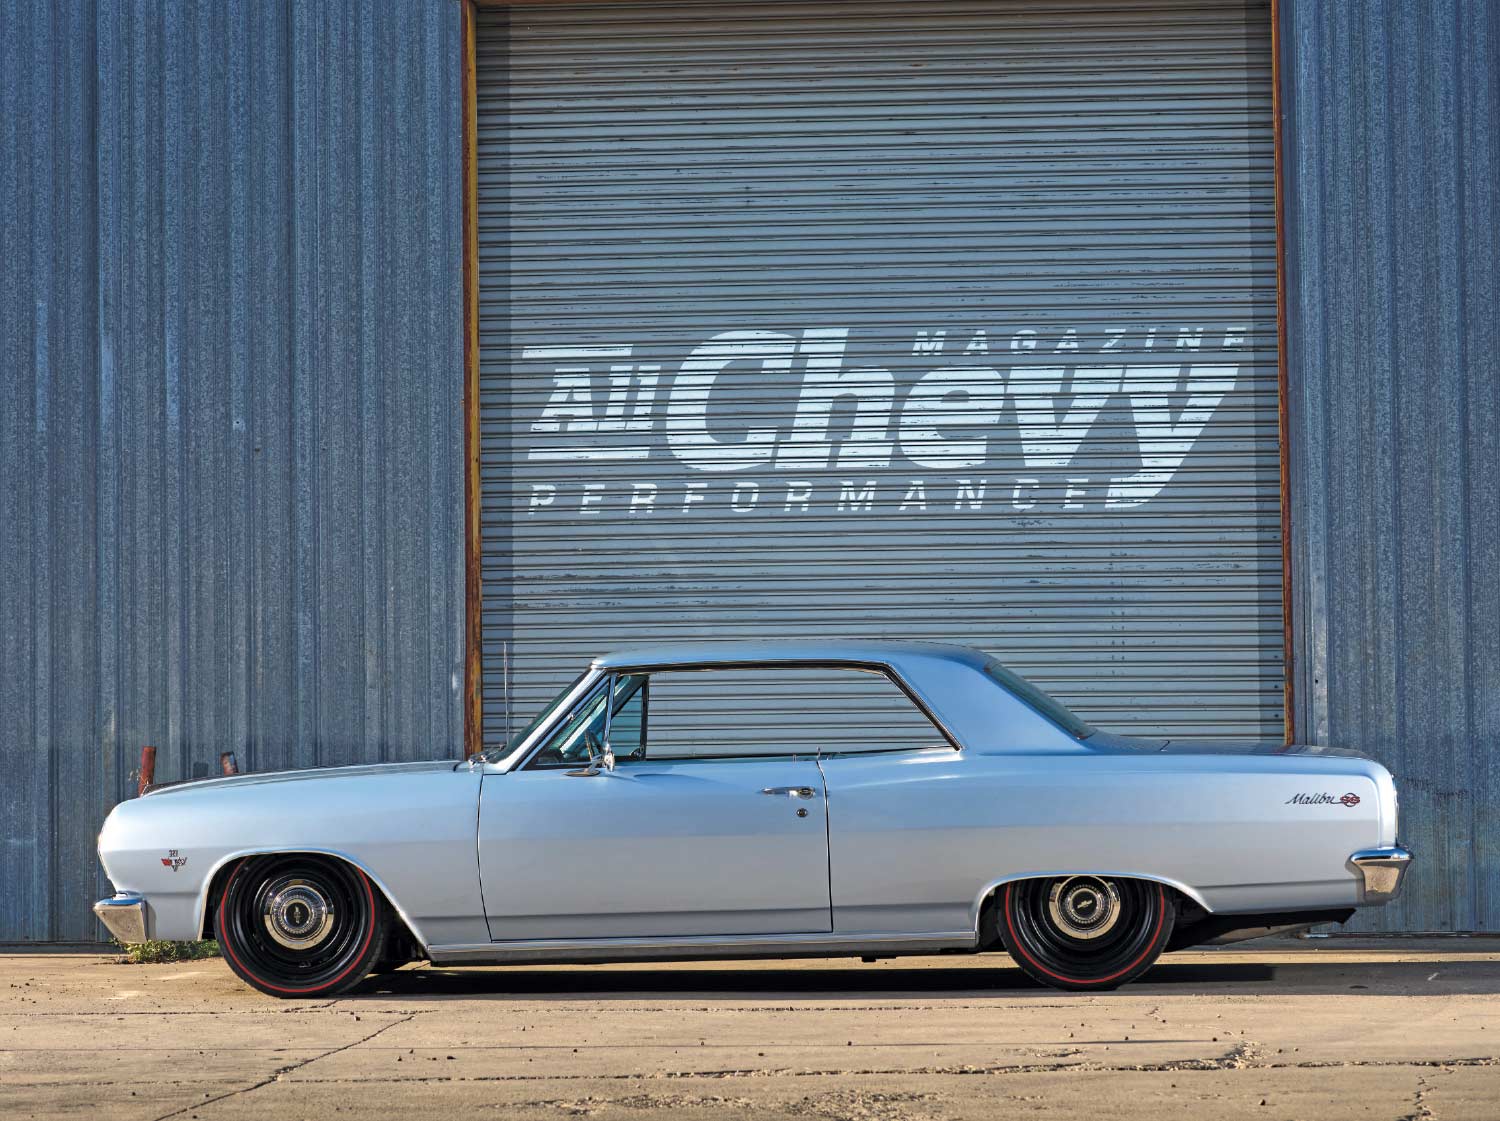 Side view of the ’65 Chevelle SS